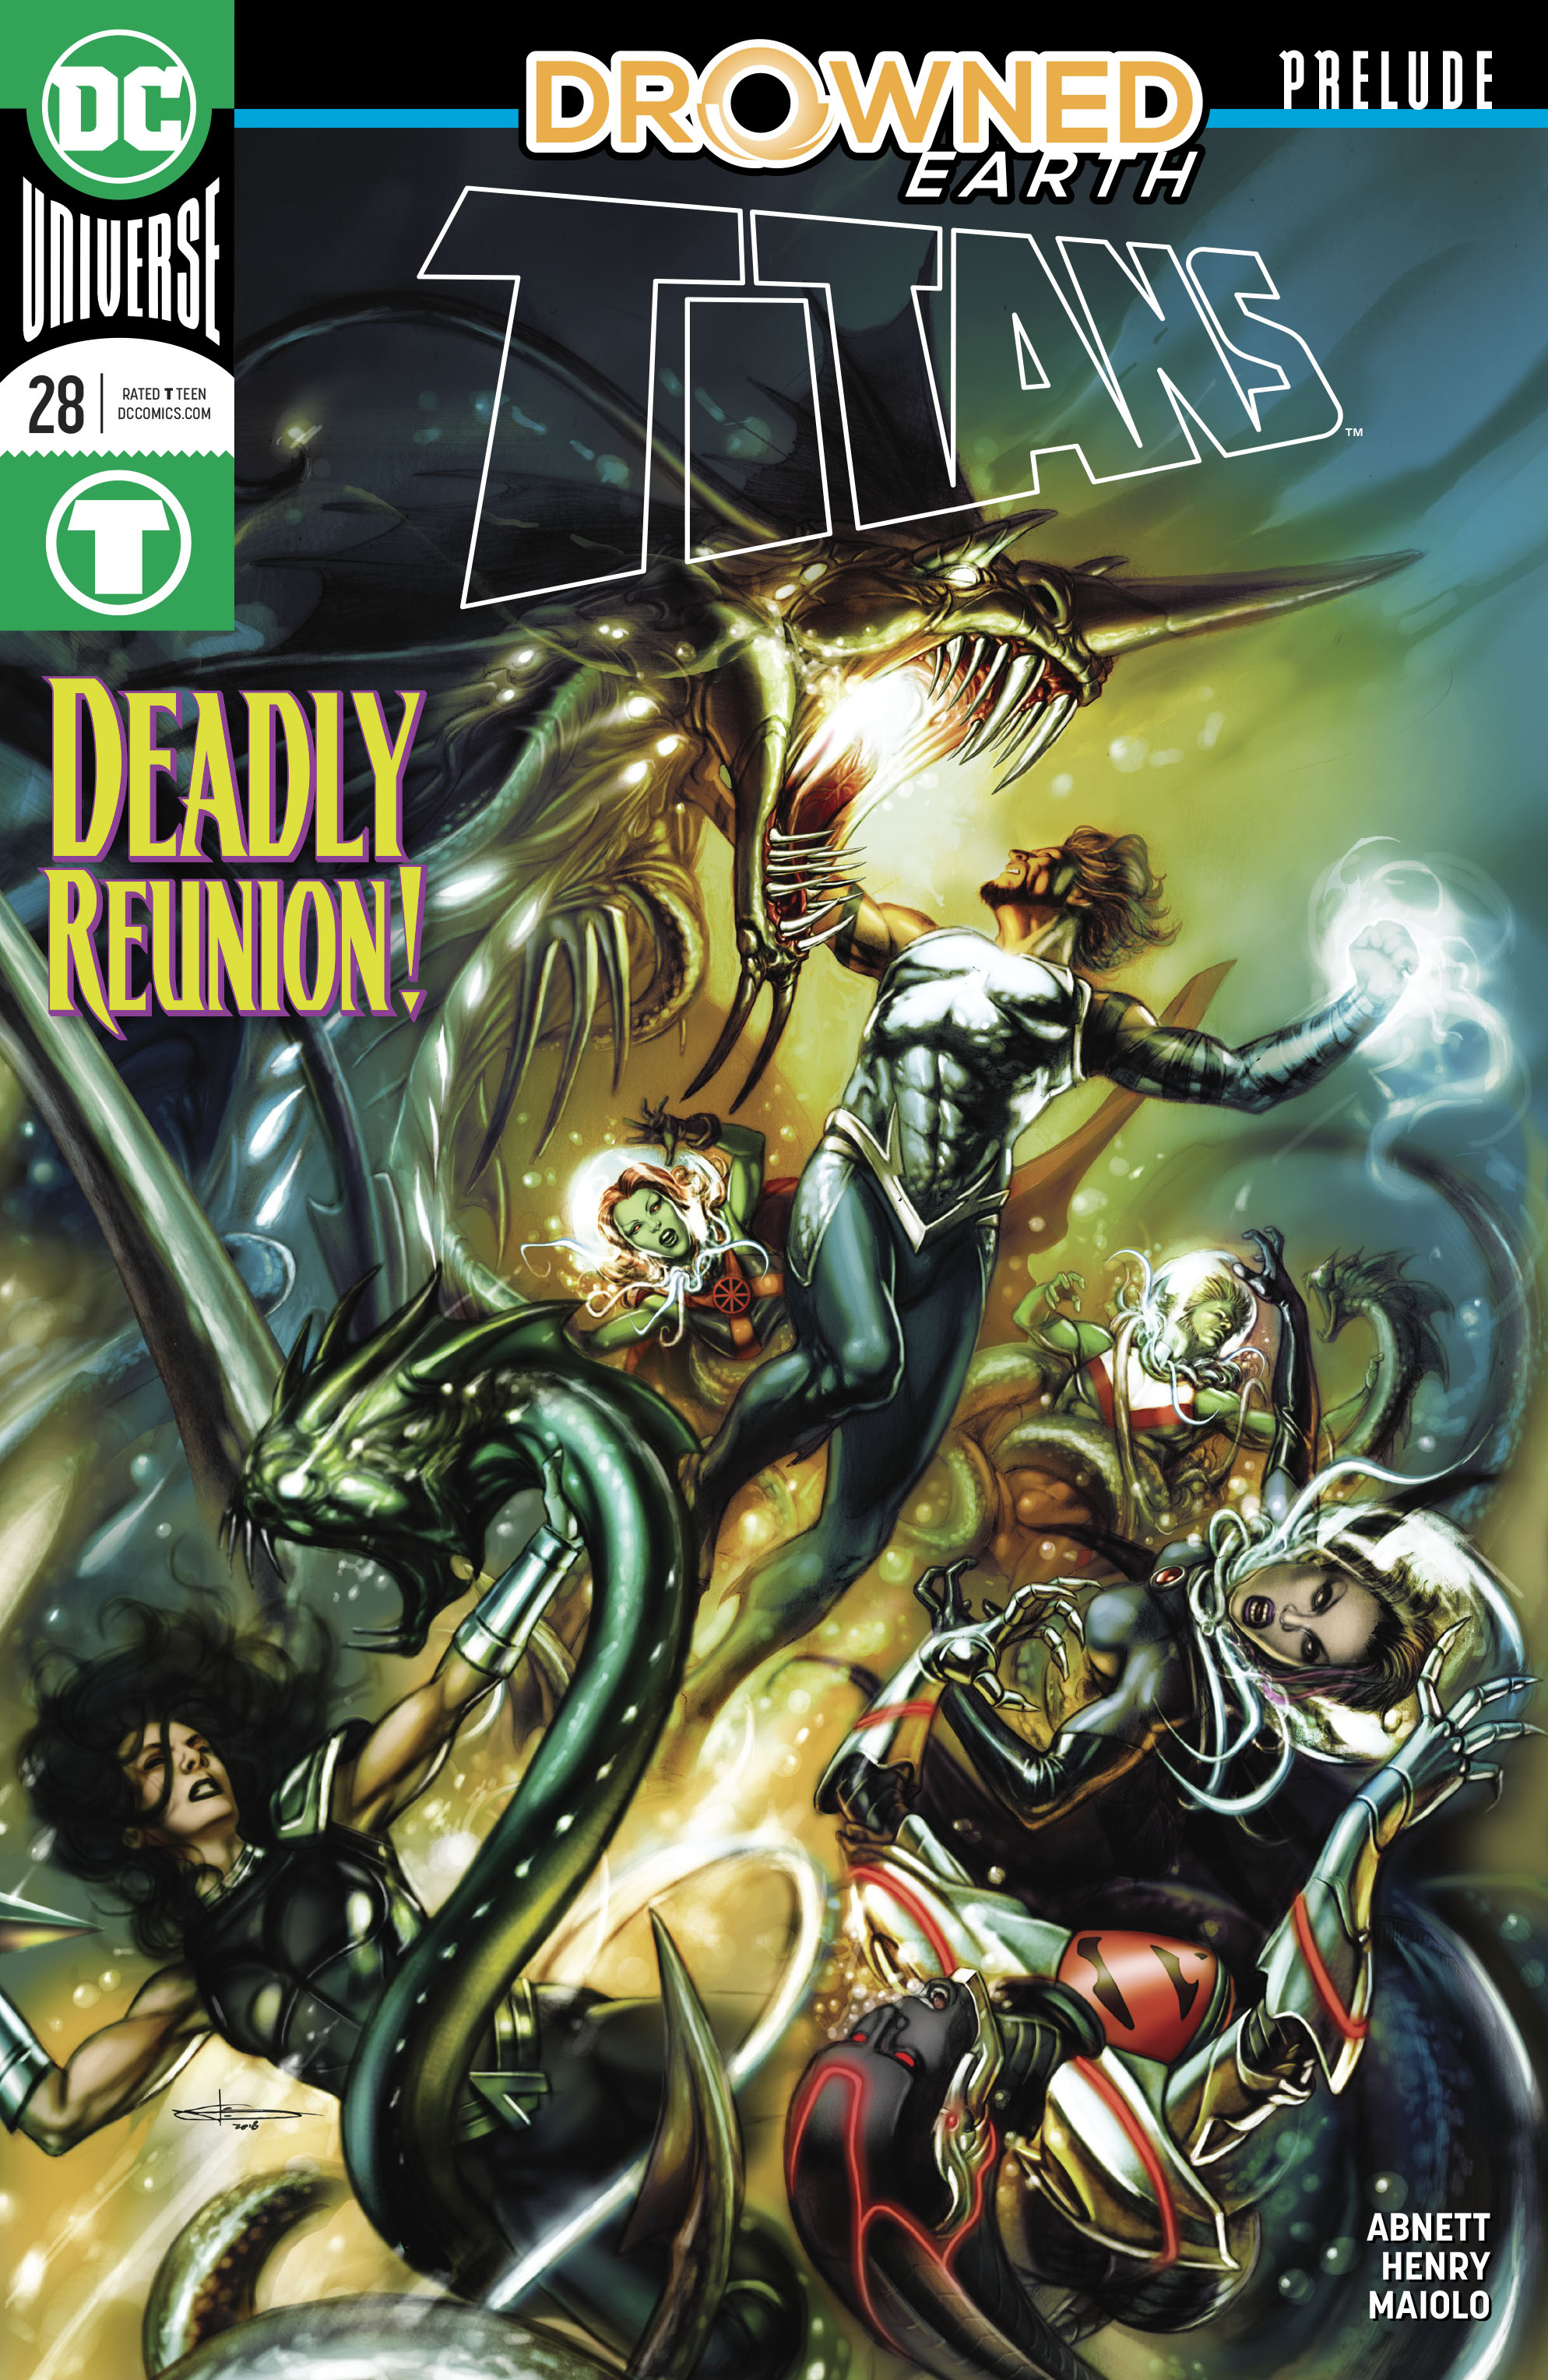 TITANS #28 (DROWNED EARTH)